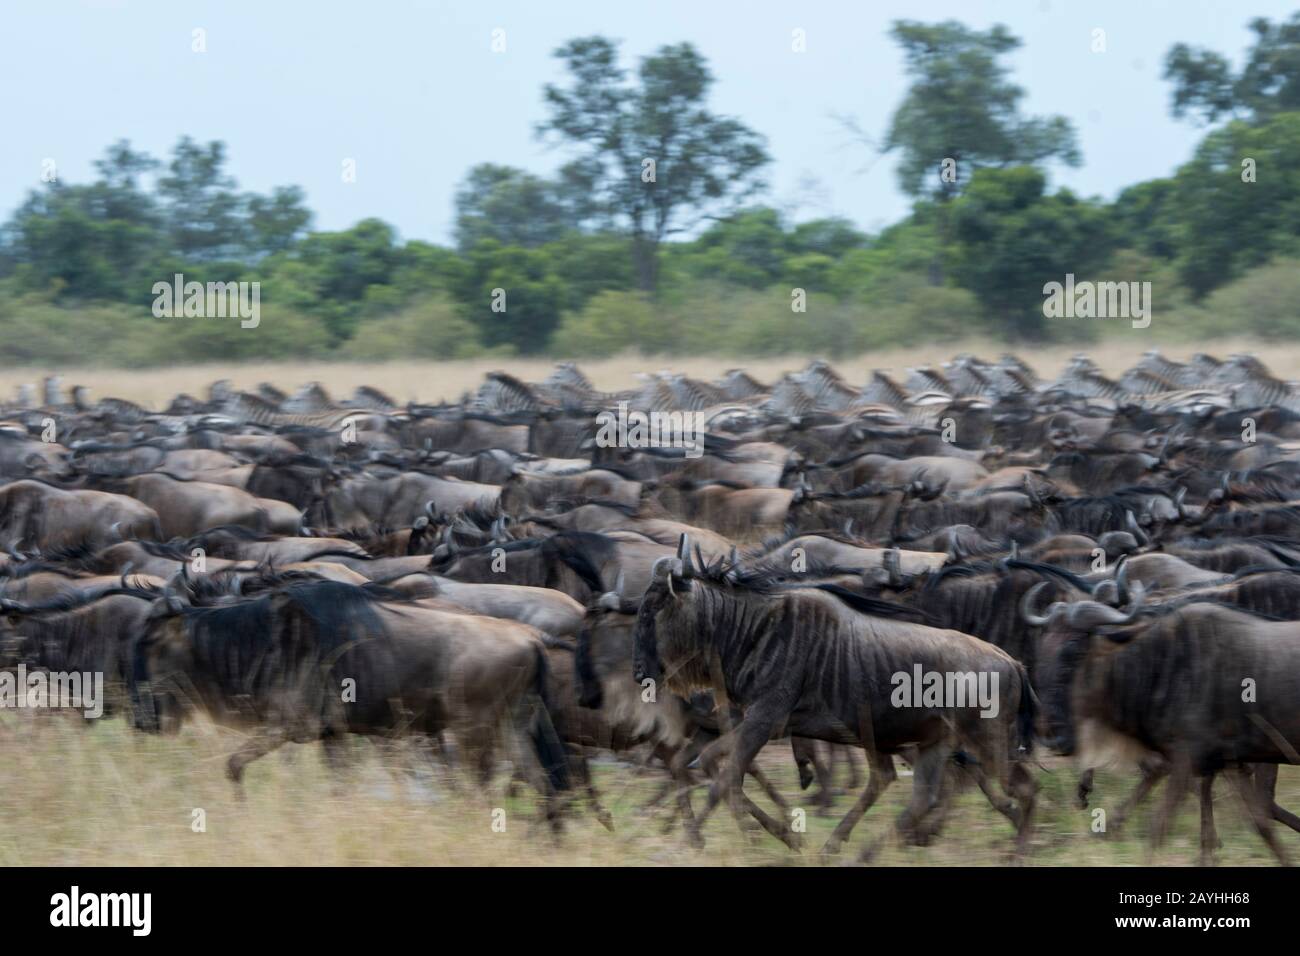 Wildebeests, also called gnus or wildebai, during their annual migration in the grassland of the Masai Mara National Reserve in Kenya. Stock Photo